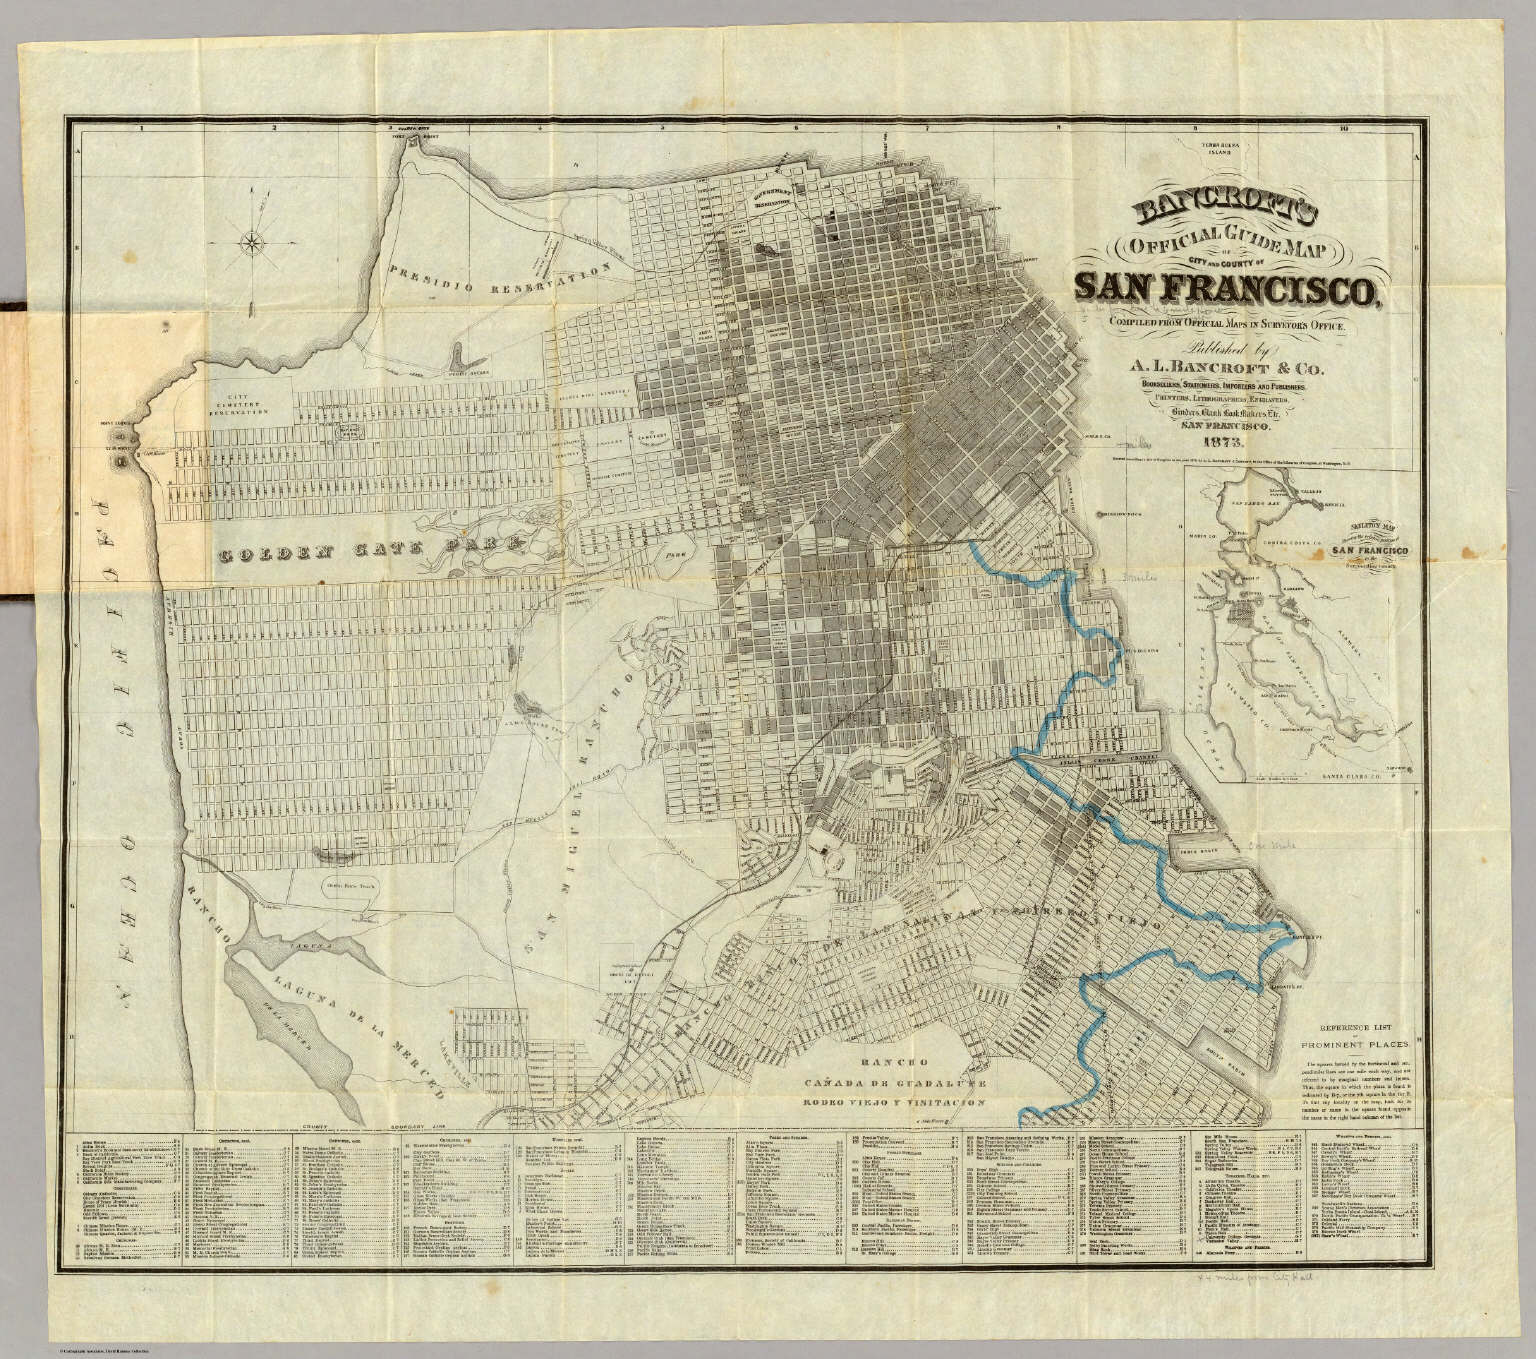 Bancroft's Official Guide Map Of City And County Of San Francisco ...